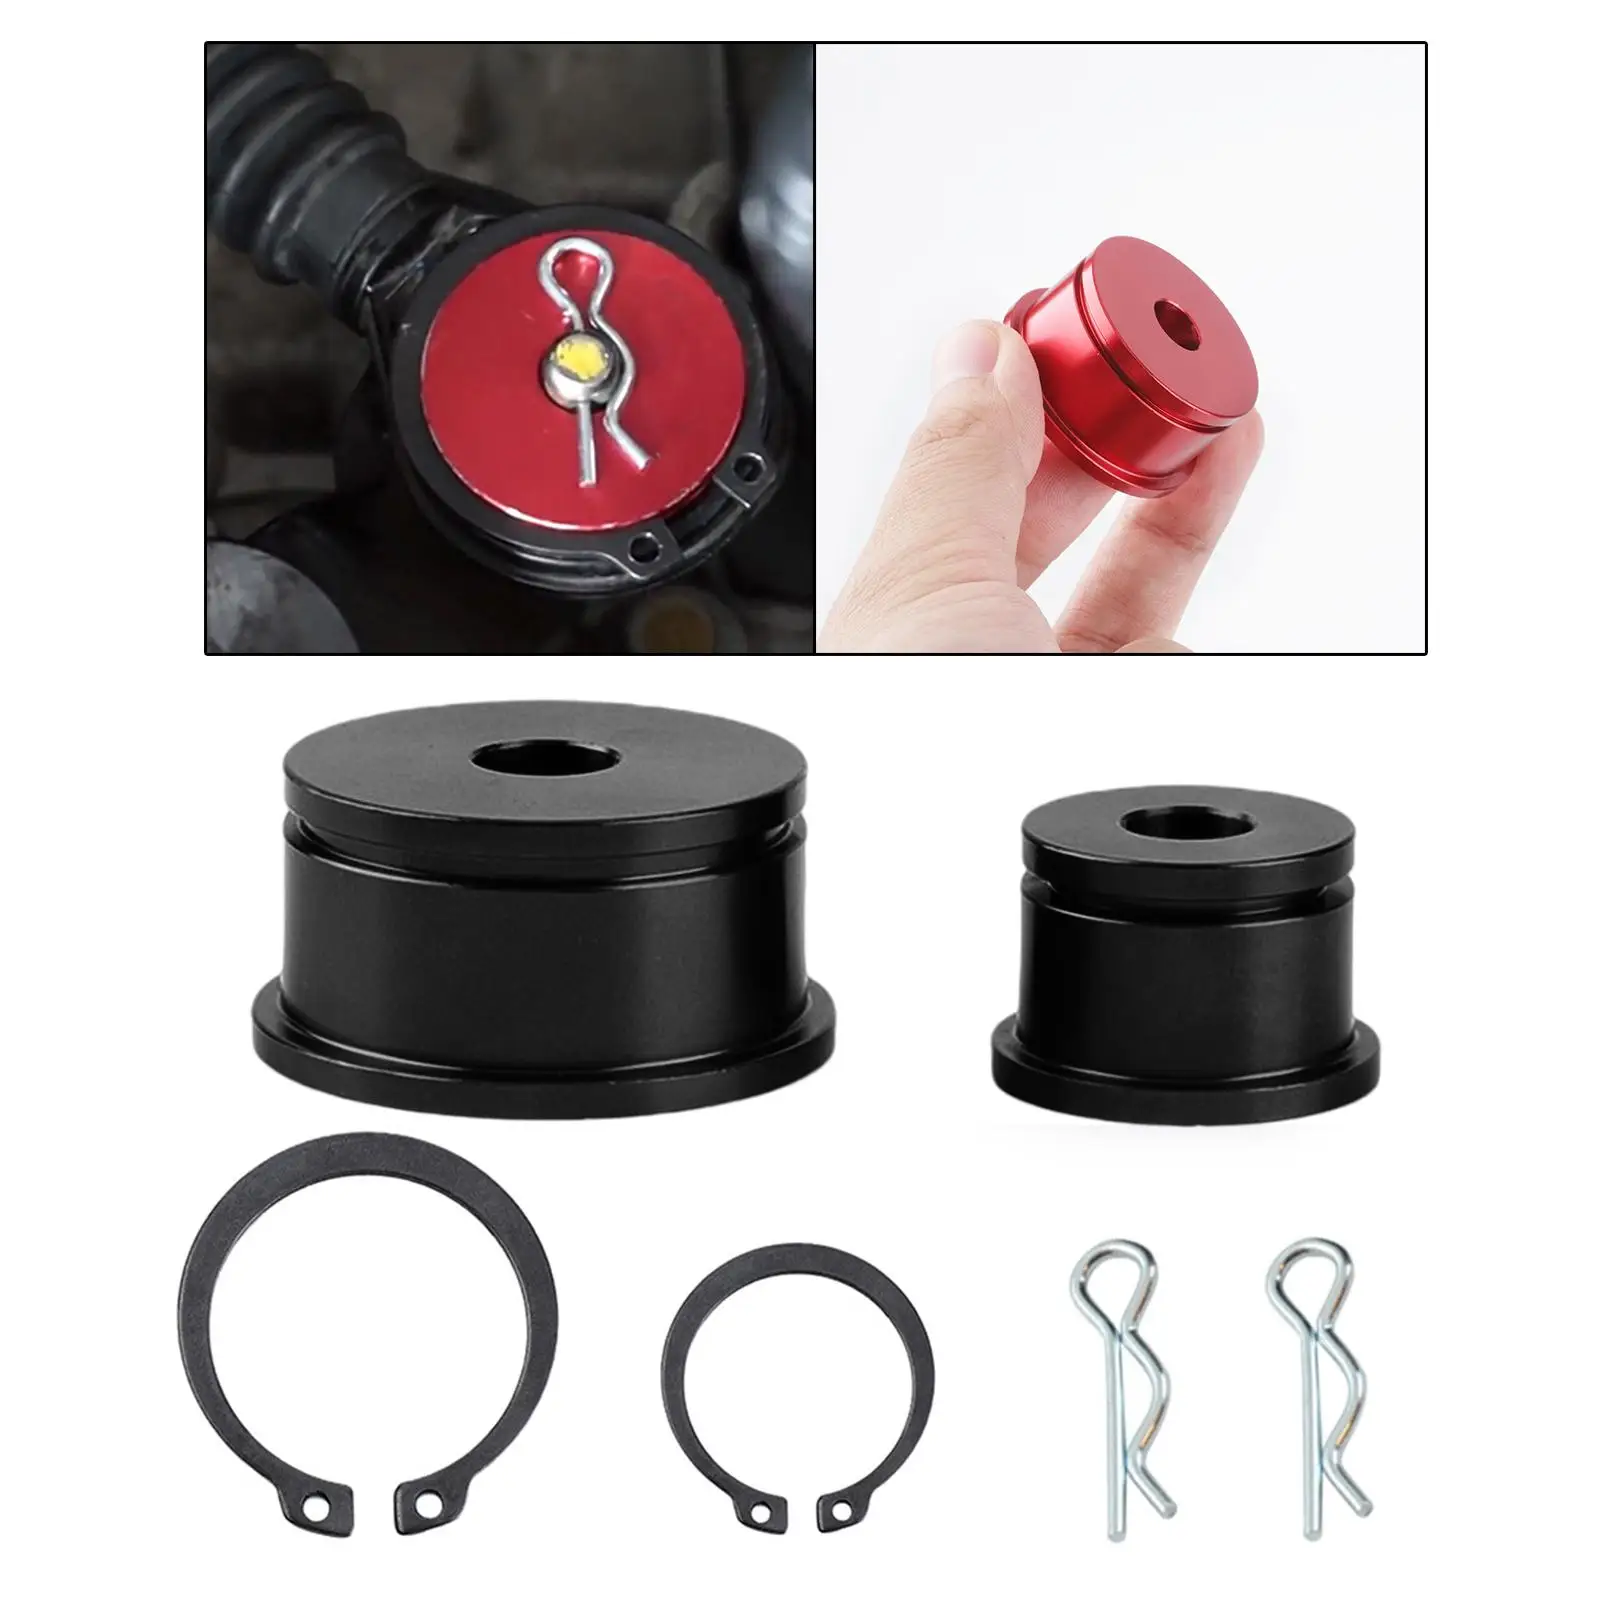 Shifter Cable Bushings Kit Fits for Mitsubishi Evolution VII iX Spare Parts Accessories